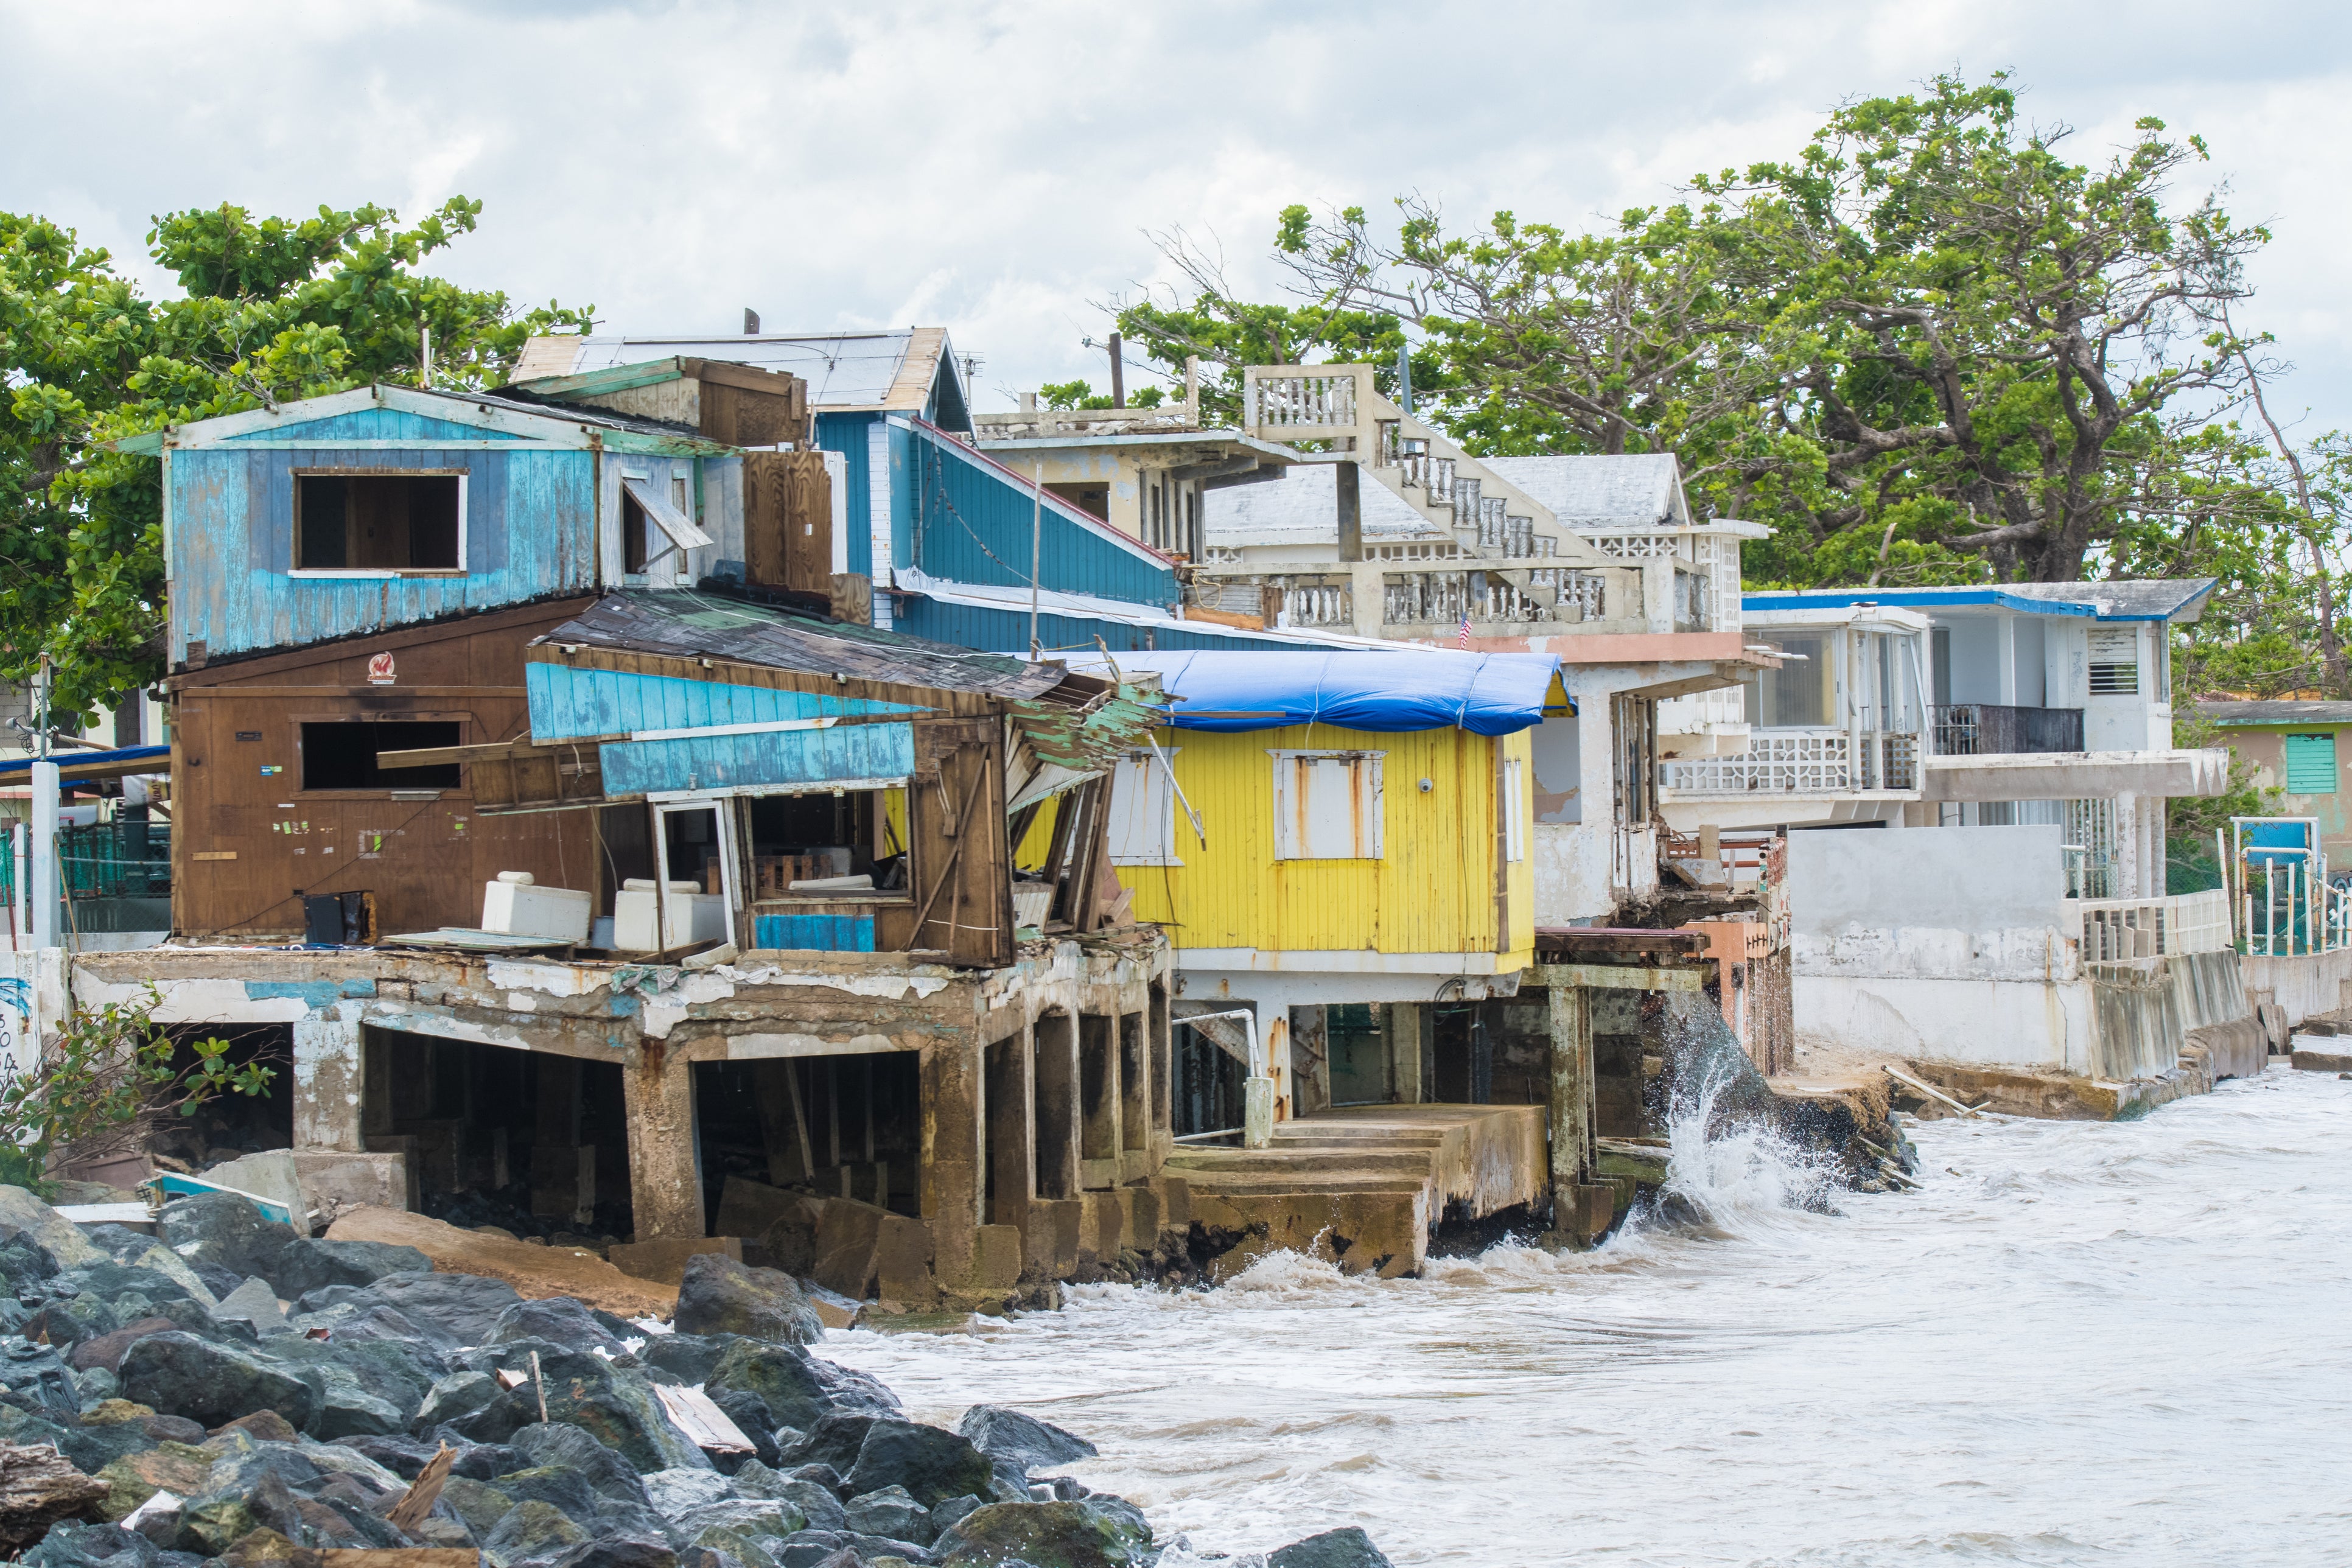 Seaside scene in Rincon, Puerto Rico after Hurricane Maria in 2017. Today a new report claims that the Trump administration delayed financial aid